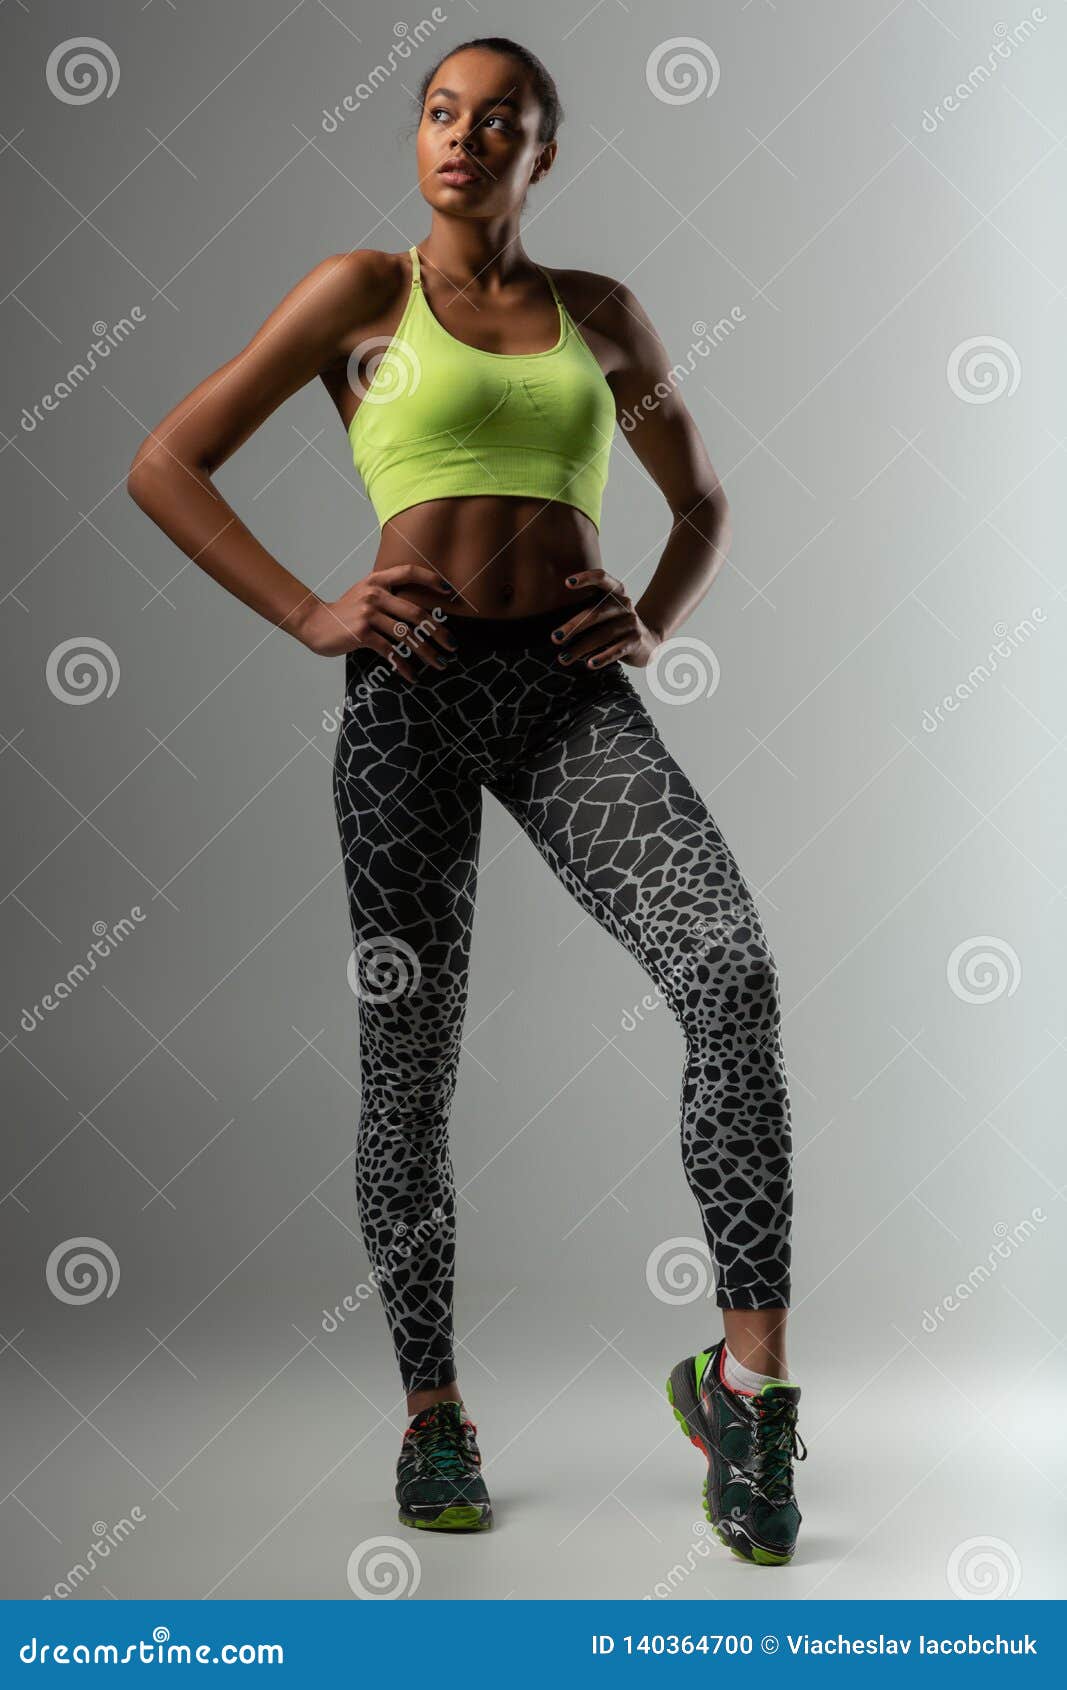 Fit healthy young woman with a strong body